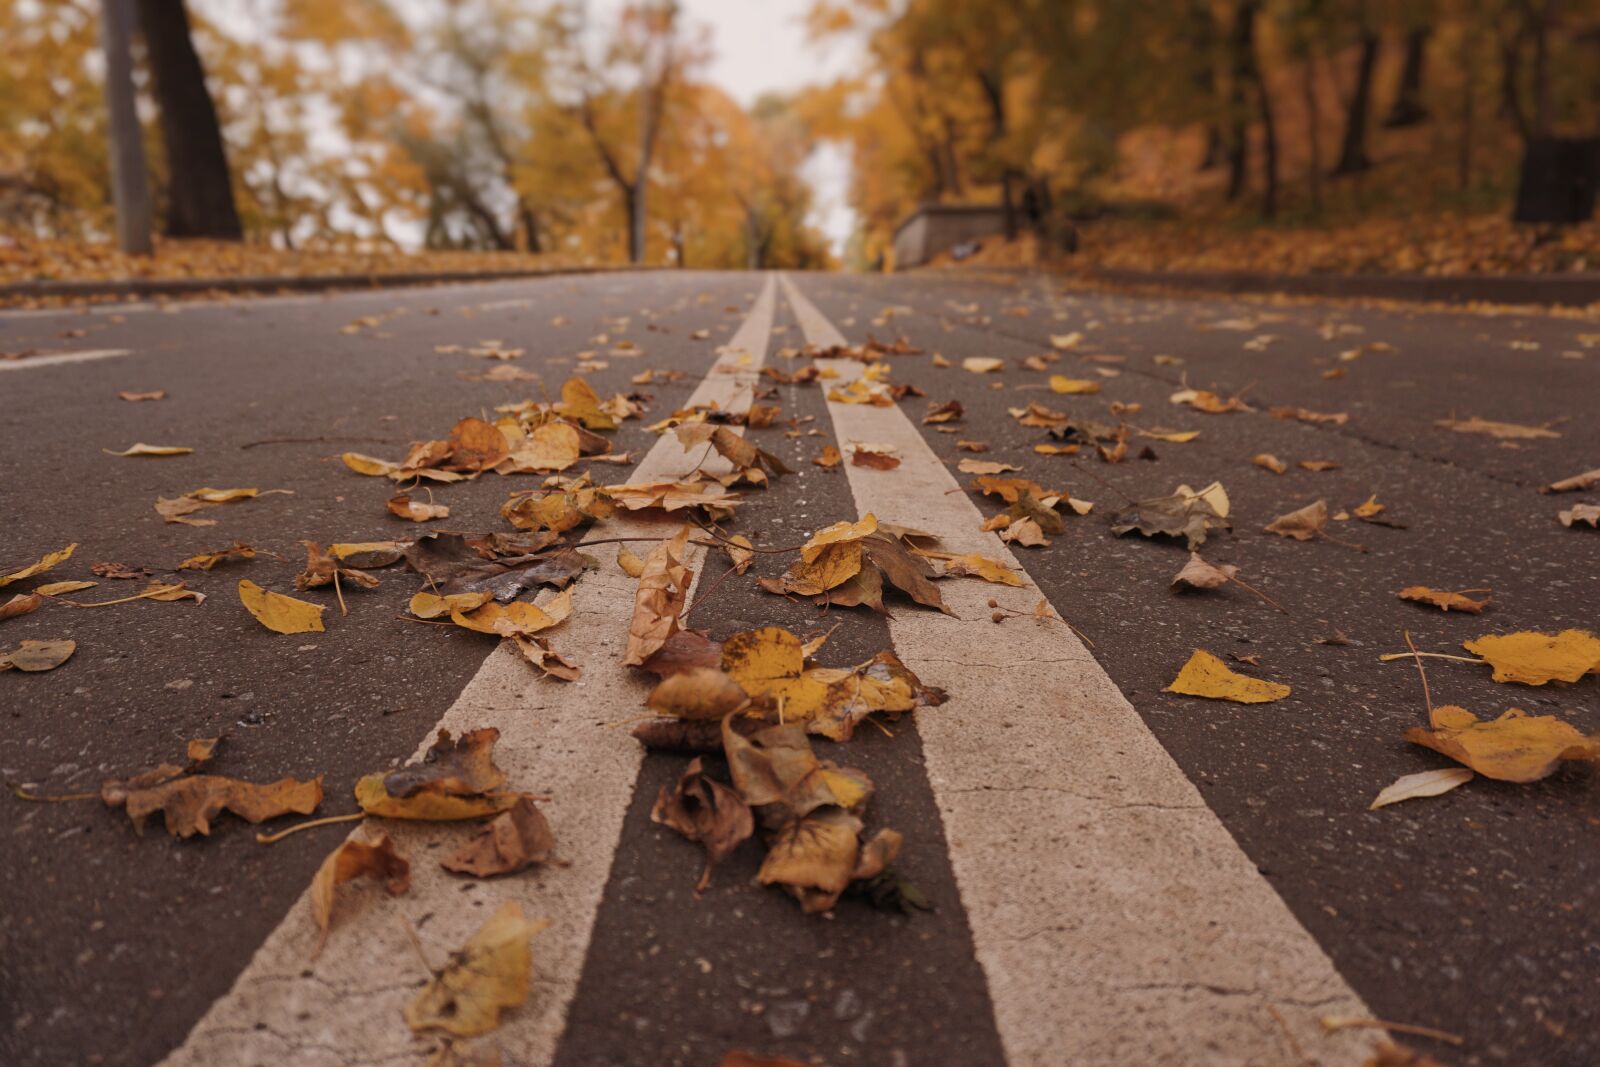 Sony a6000 sample photo. Road, autumn, leaves photography